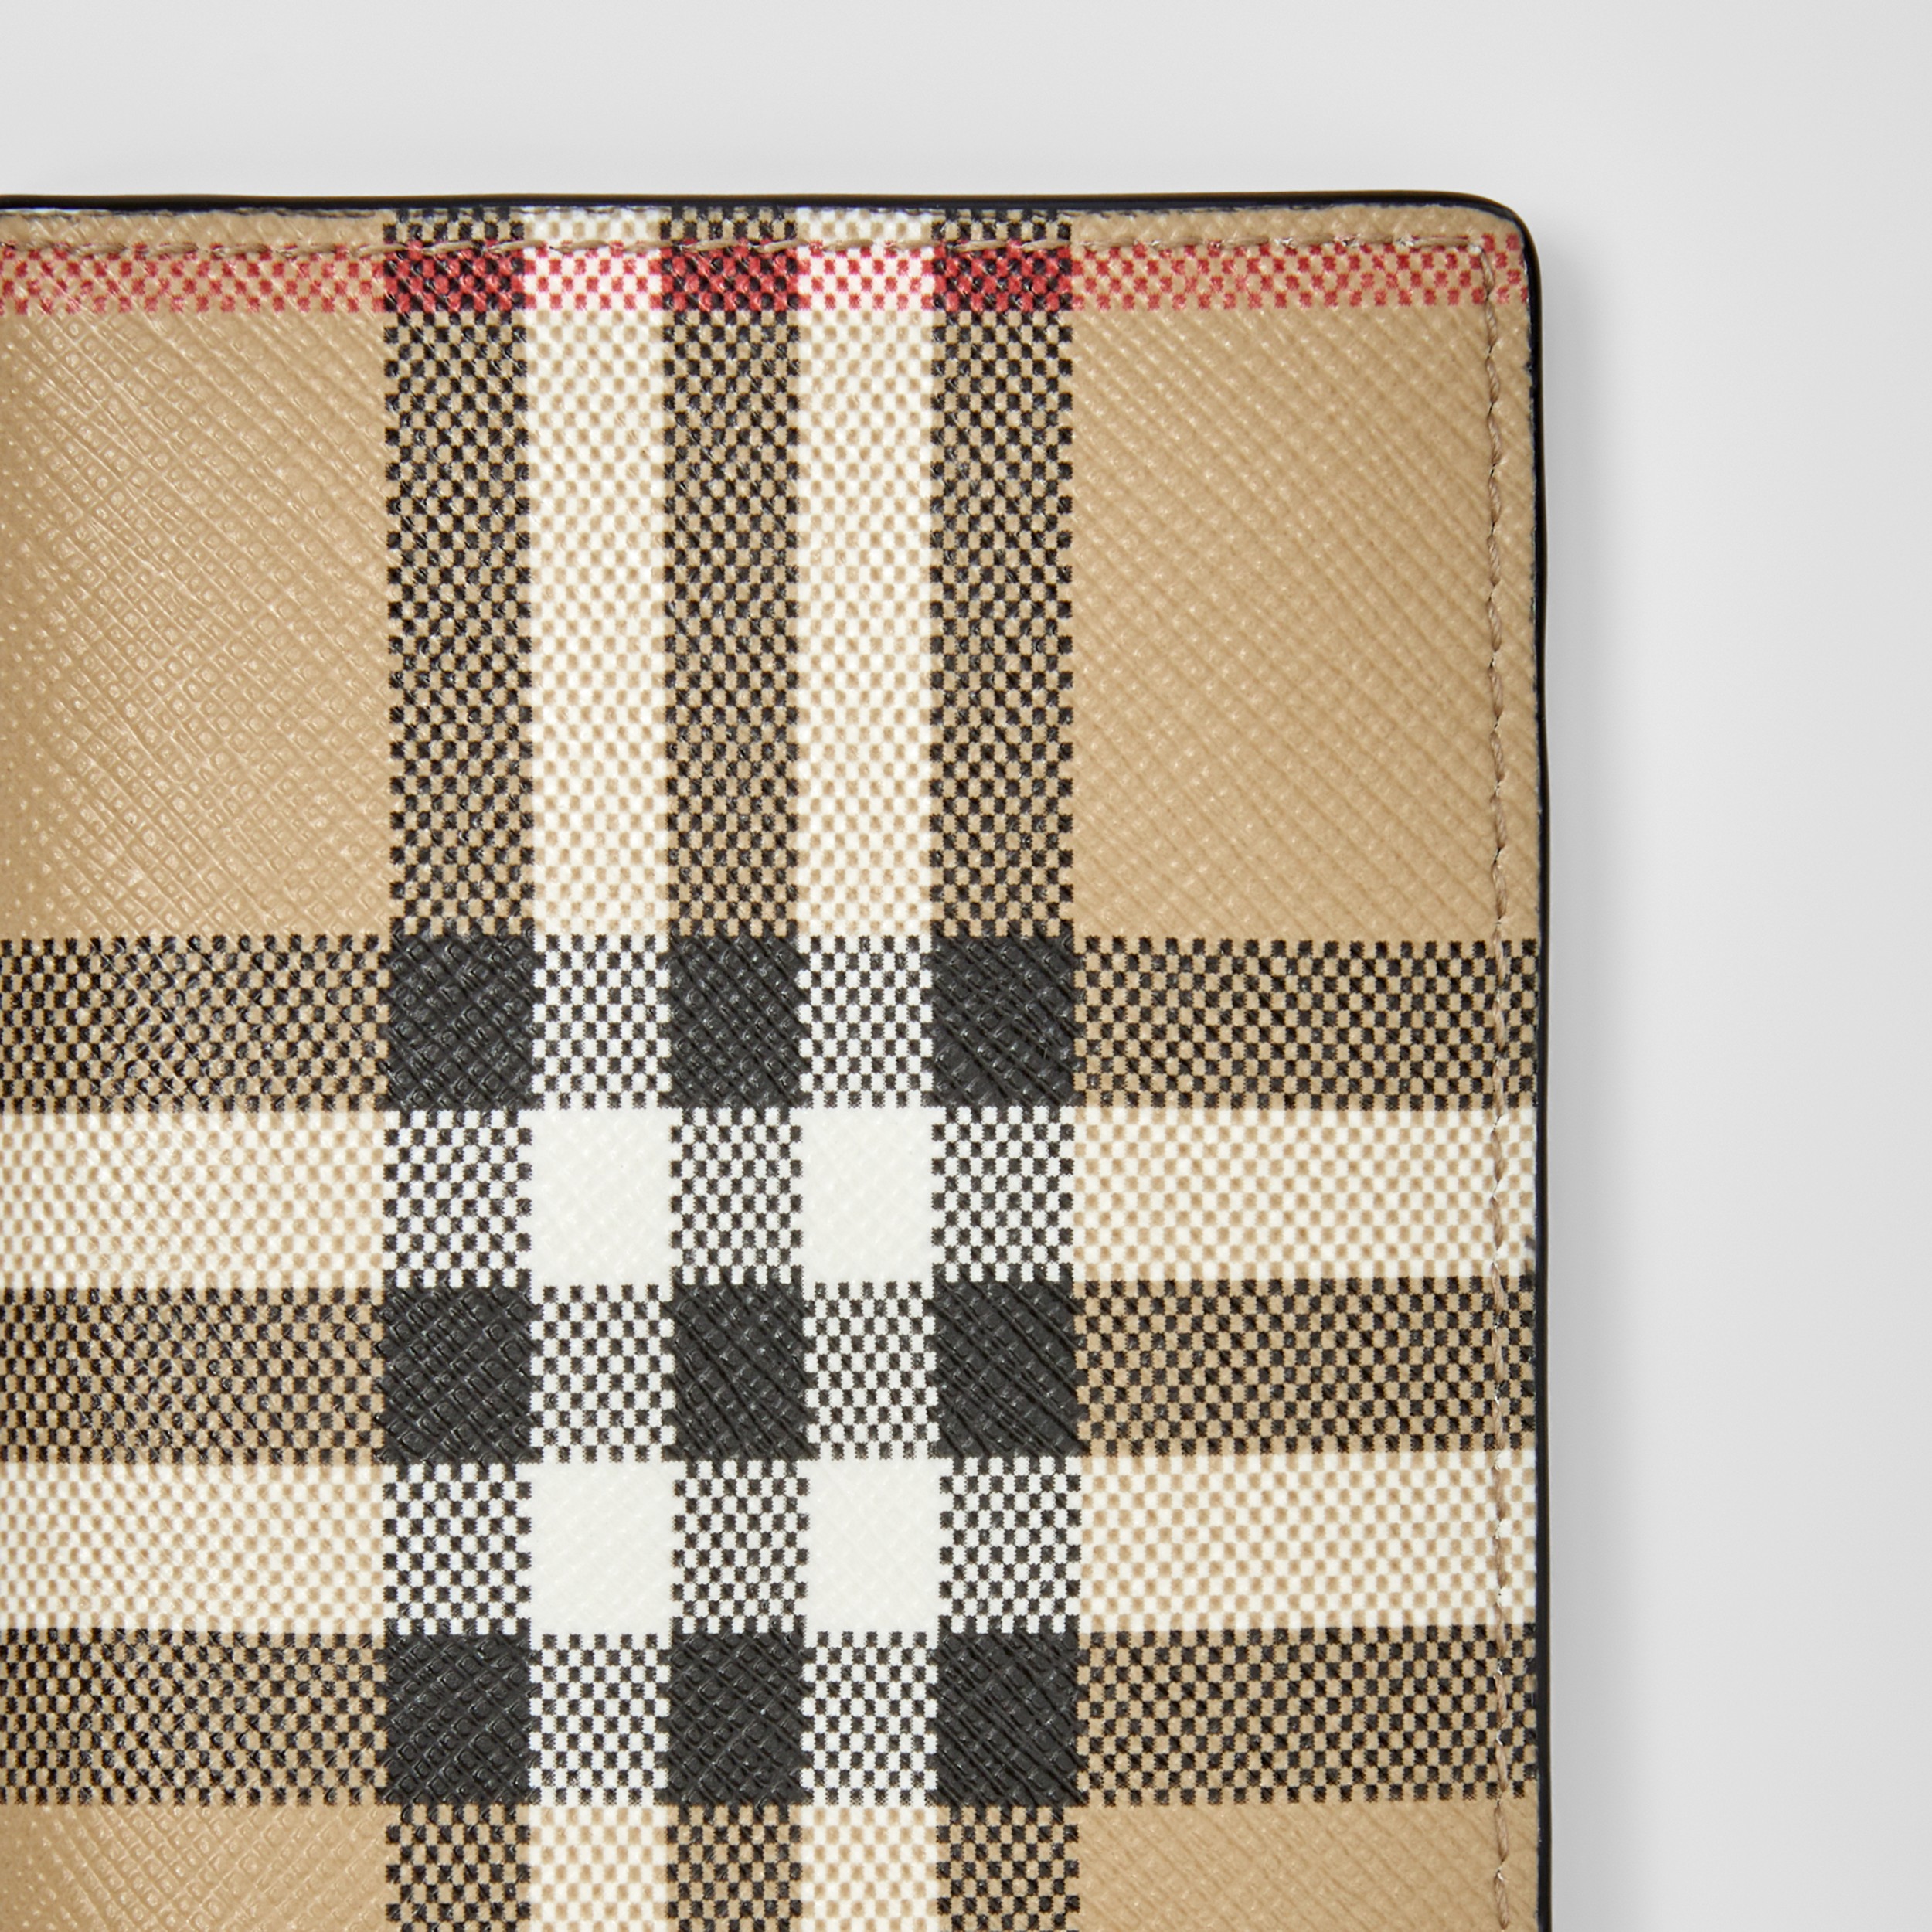 Vintage Check and Leather Folding Card Case in Archive Beige - Men | Burberry® Official - 3